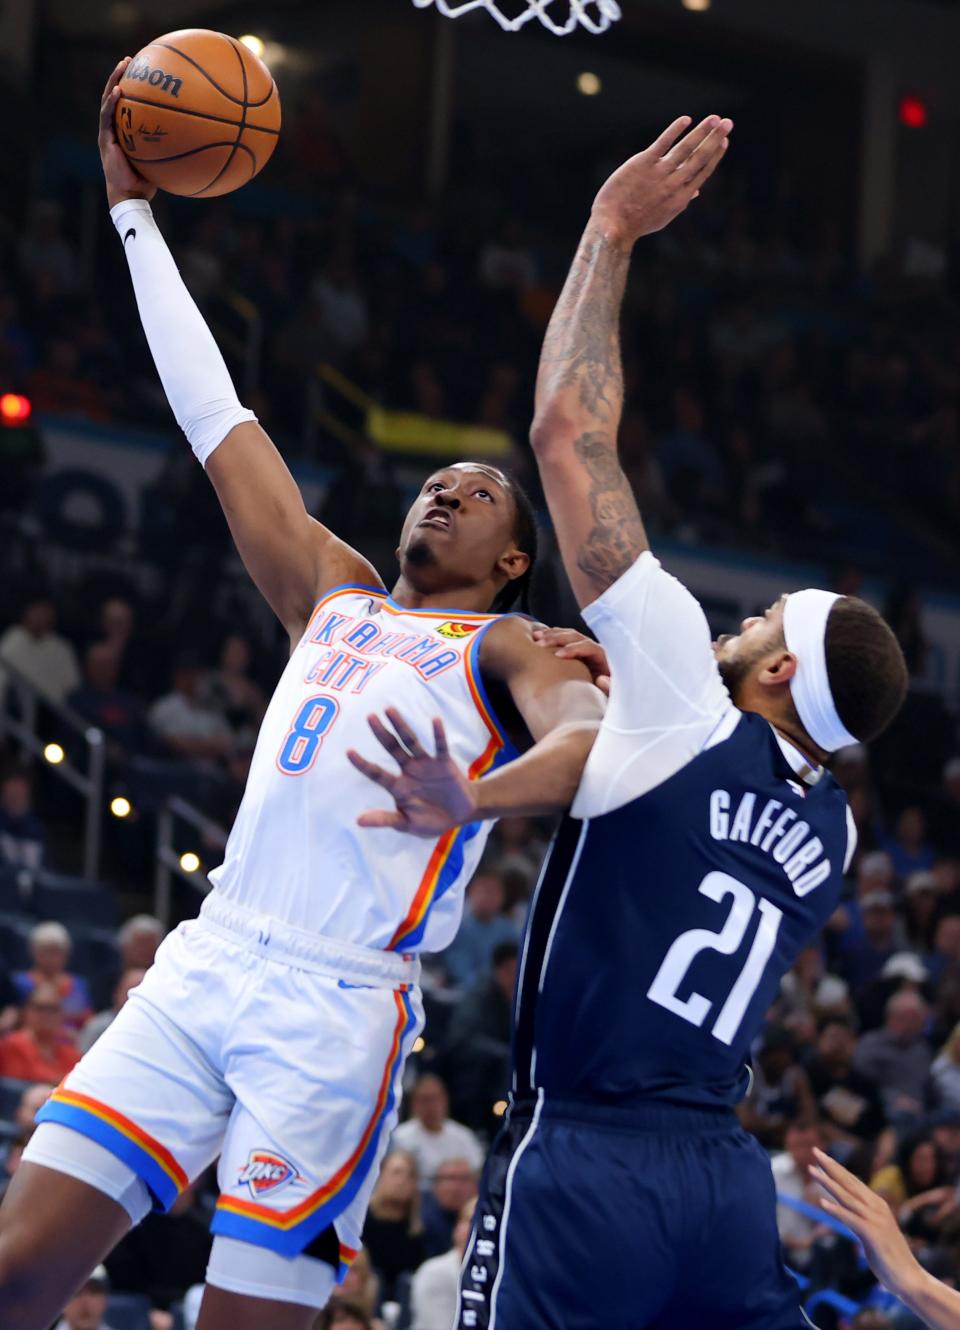 Jalen Williams (8) goes up for a basket as Dallas Mavericks' Daniel Gafford (21) defends in the first half of the NBA basketball game between the Oklahoma City Thunder and Dallas Mavericks at Paycom Center in Oklahoma City, Thursday, March 14, 2024.